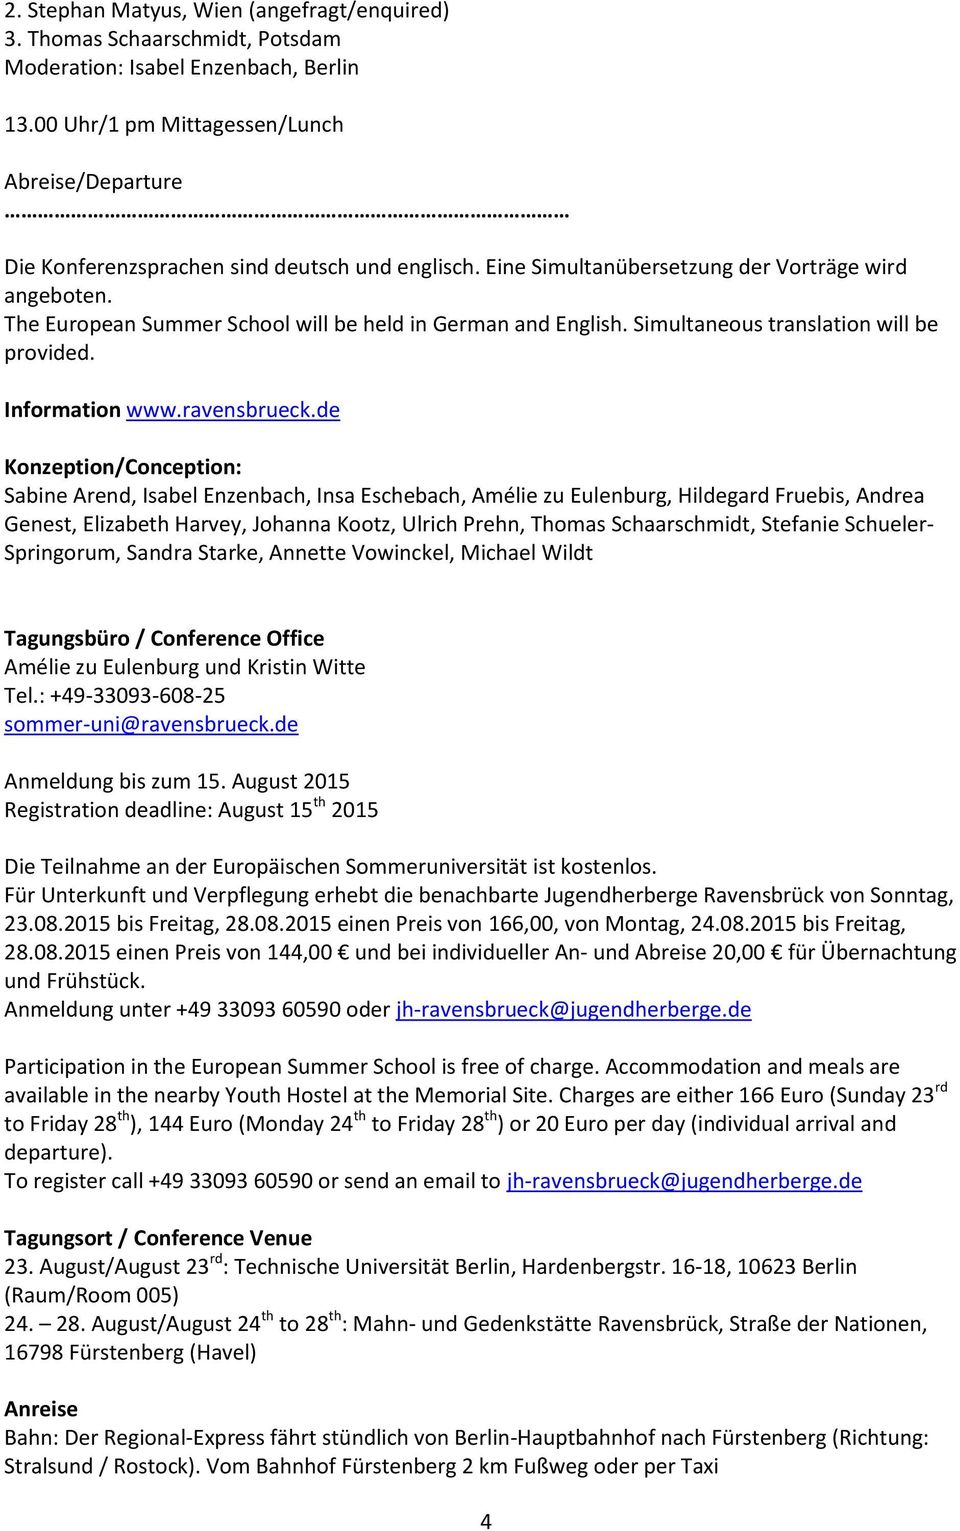 The European Summer School will be held in German and English. Simultaneous translation will be provided. Information www.ravensbrueck.